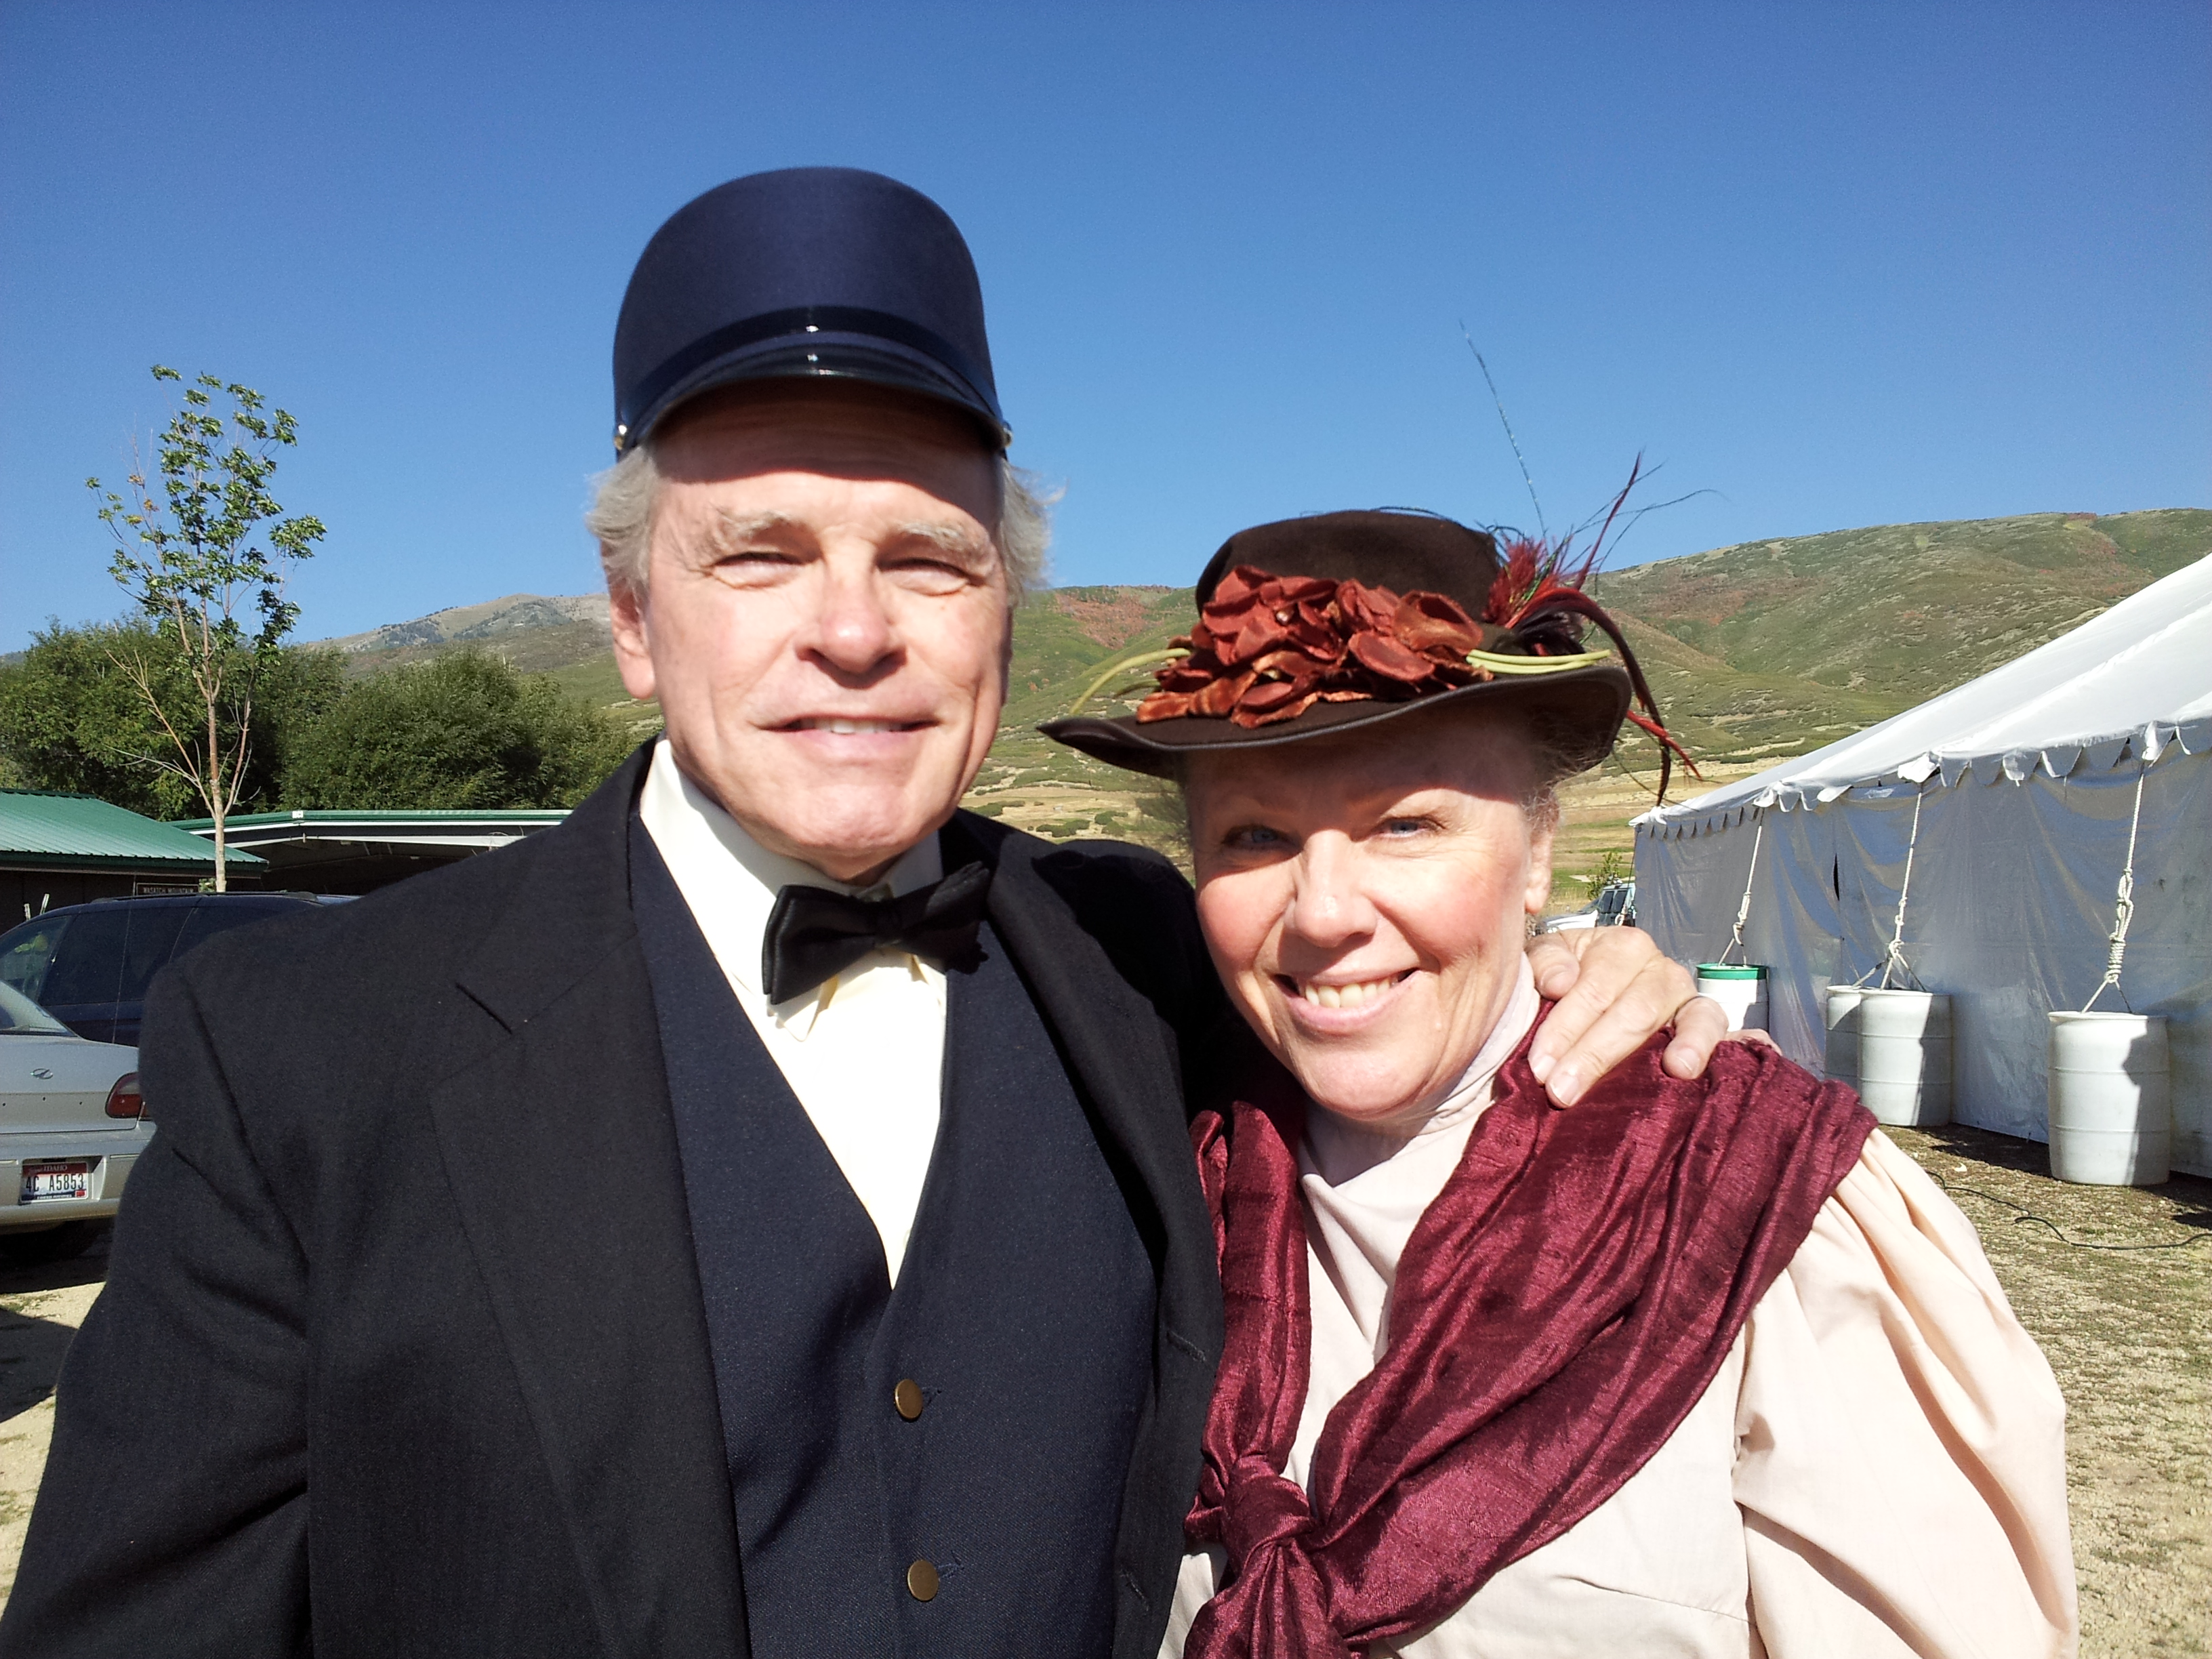 ON SET: 'The West' Deborah Lee Douglas with My Friend and Legendary Actor 'Michael Flynn' an AMC Mini-Series for 2016 Exec Prod Robert Redford ... Heber City, Soldier Hollow, UT. 9.2015